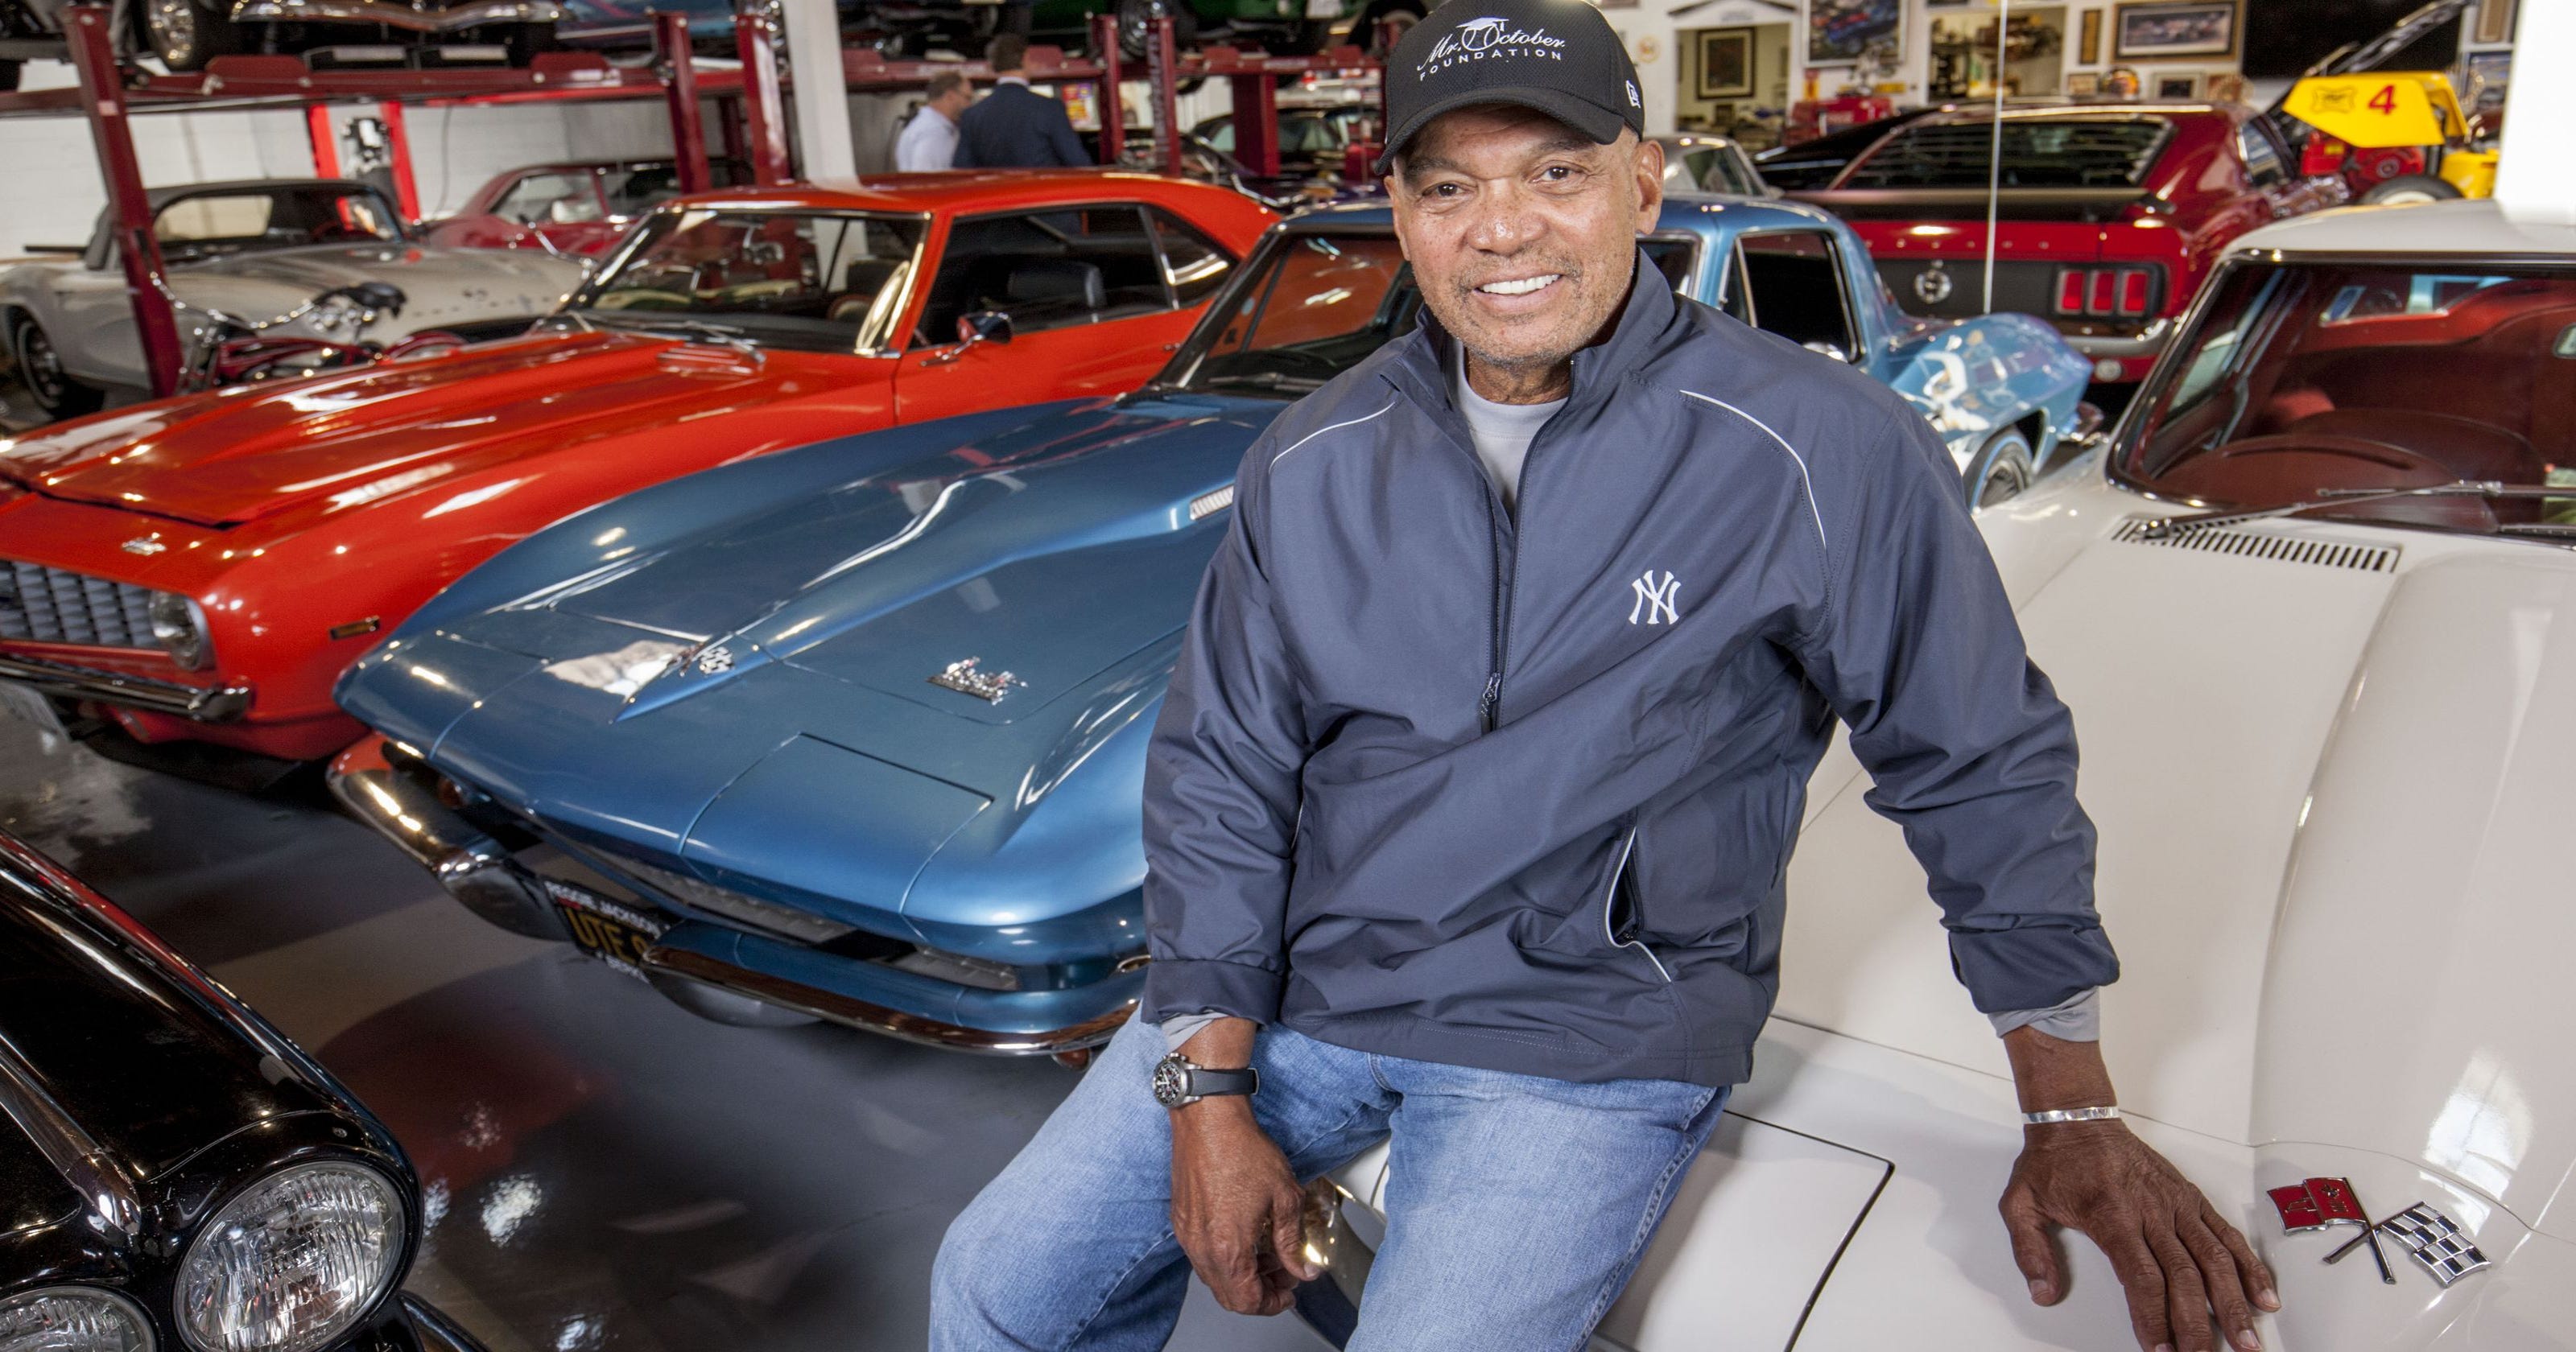 Reggie Jackson is auctioning off part of his car collection